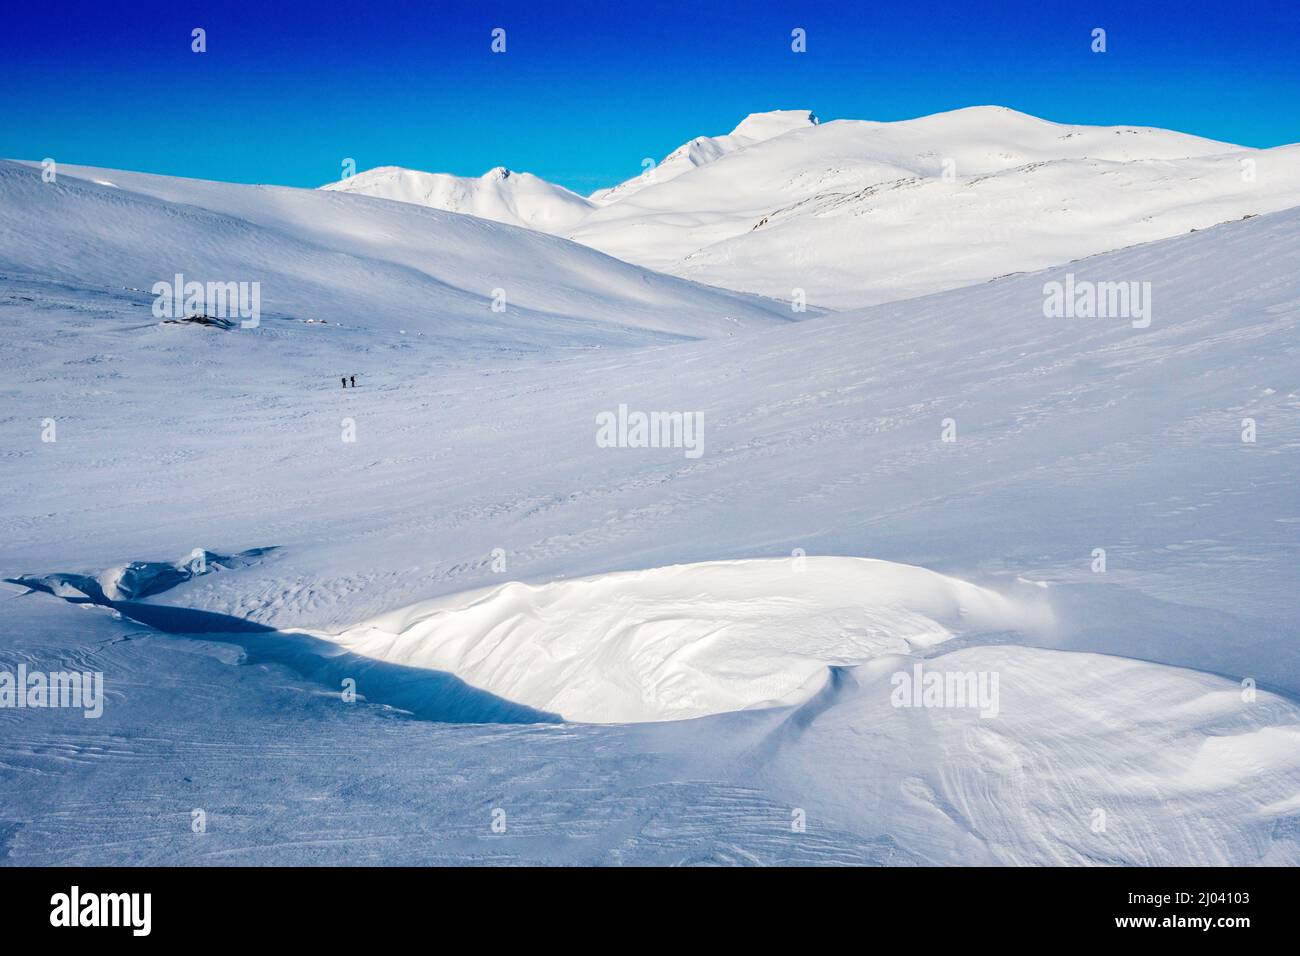 two skiers on a ski tour in theTrollheim region of Norway in winter Stock Photo